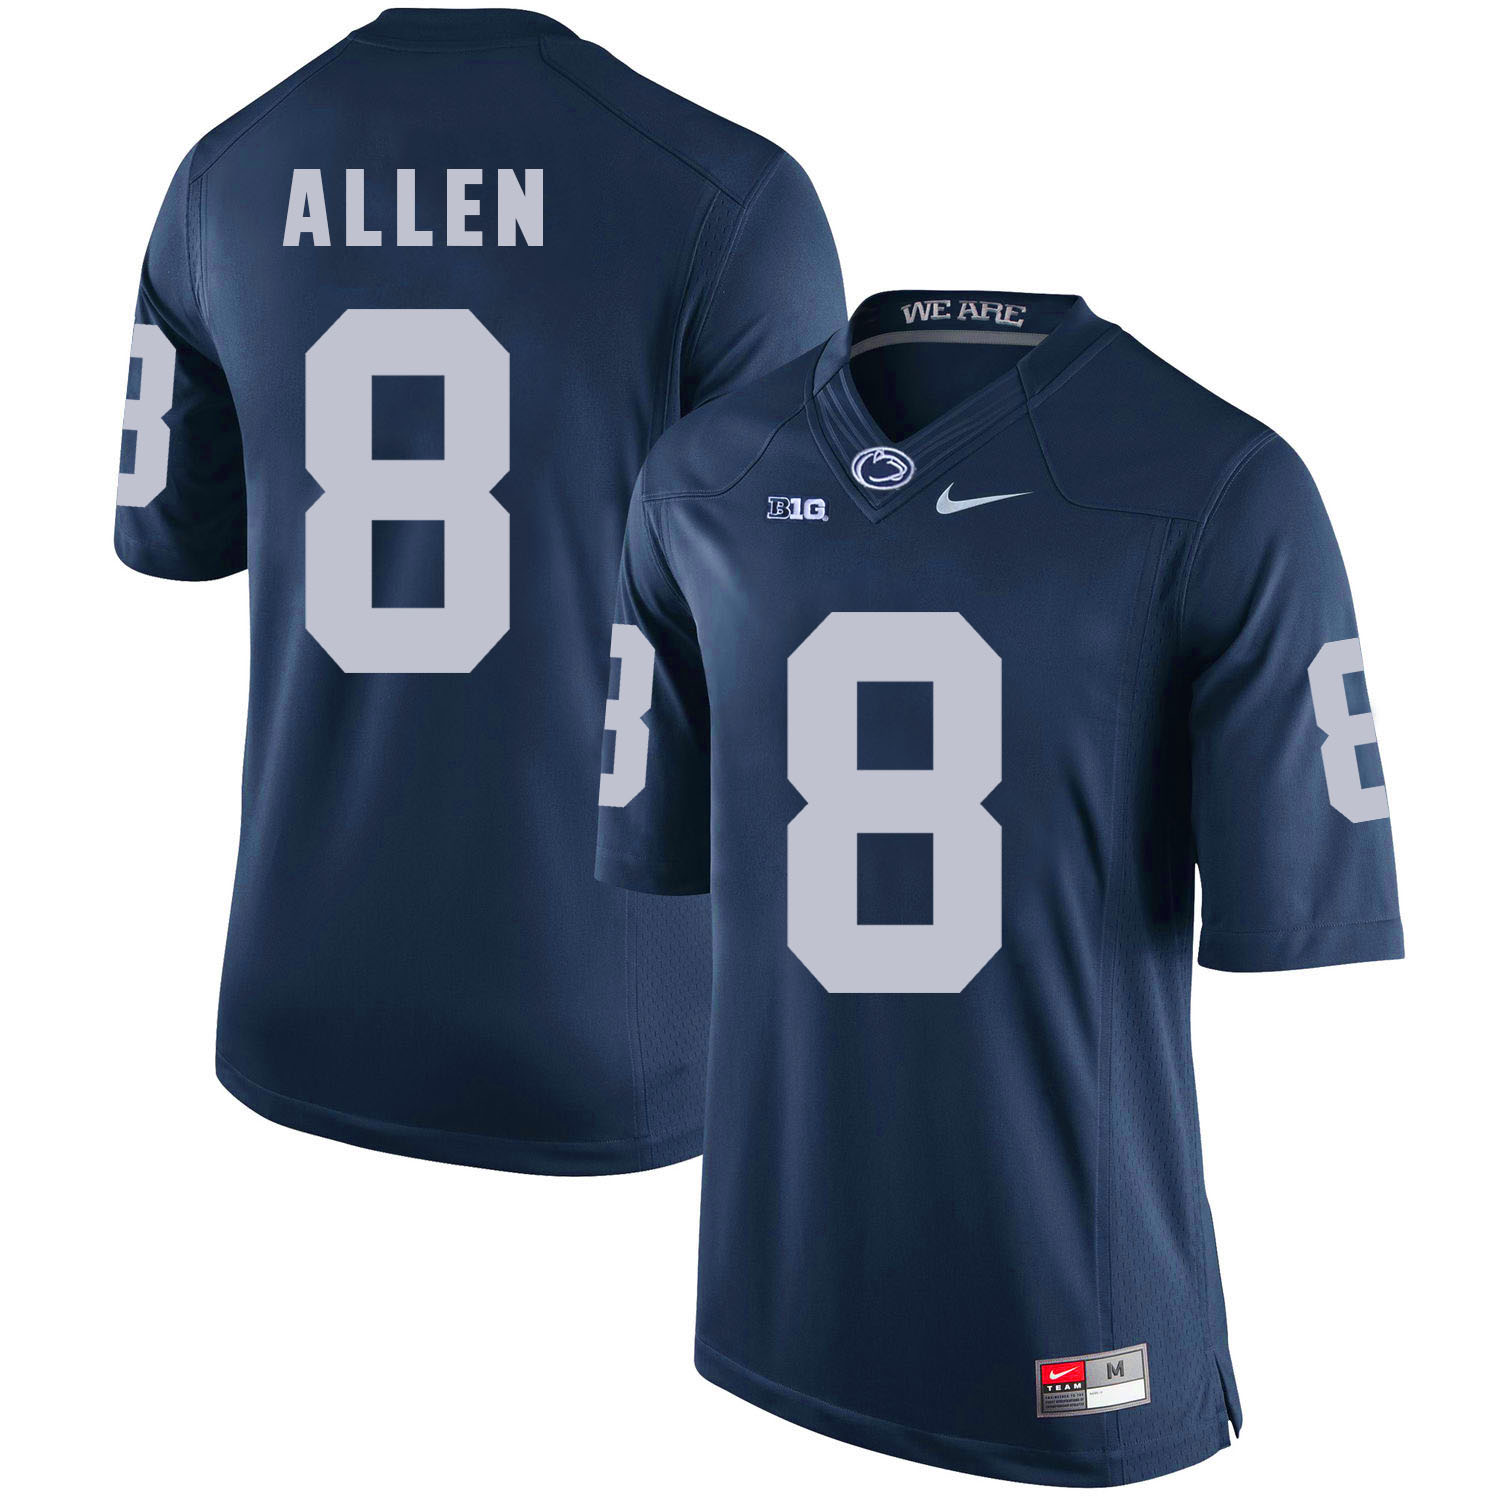 Penn State Nittany Lions 8 Mark Allen Navy College Football Jersey